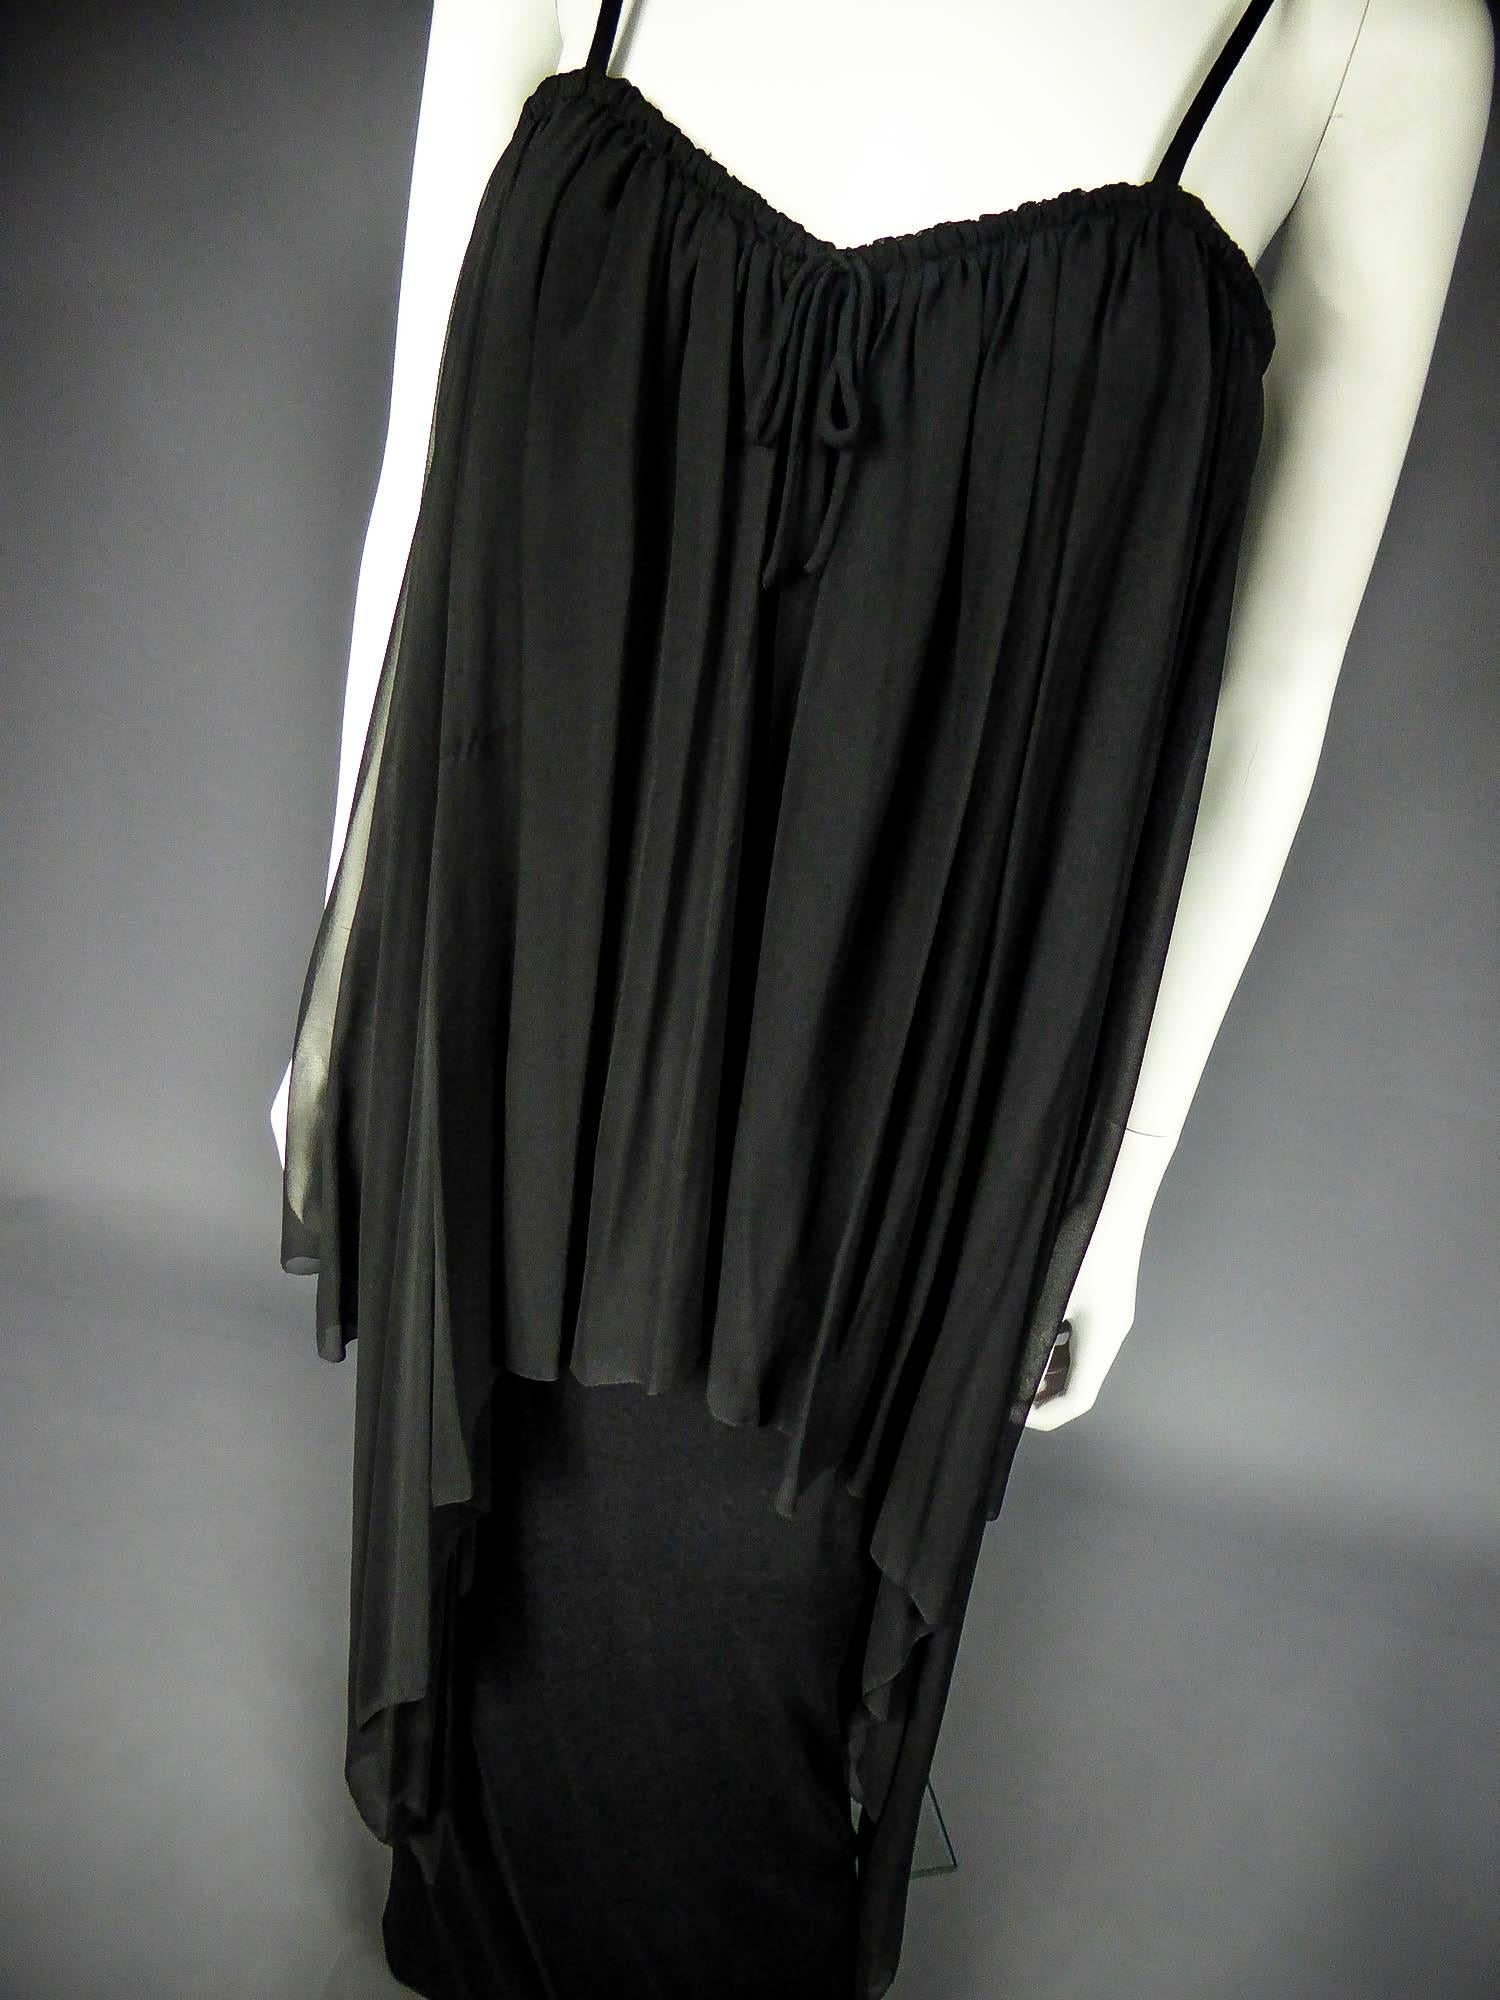 A Christian Dior Haute Couture Evening Dress by Marc Bohan Circa 1975 For Sale 1